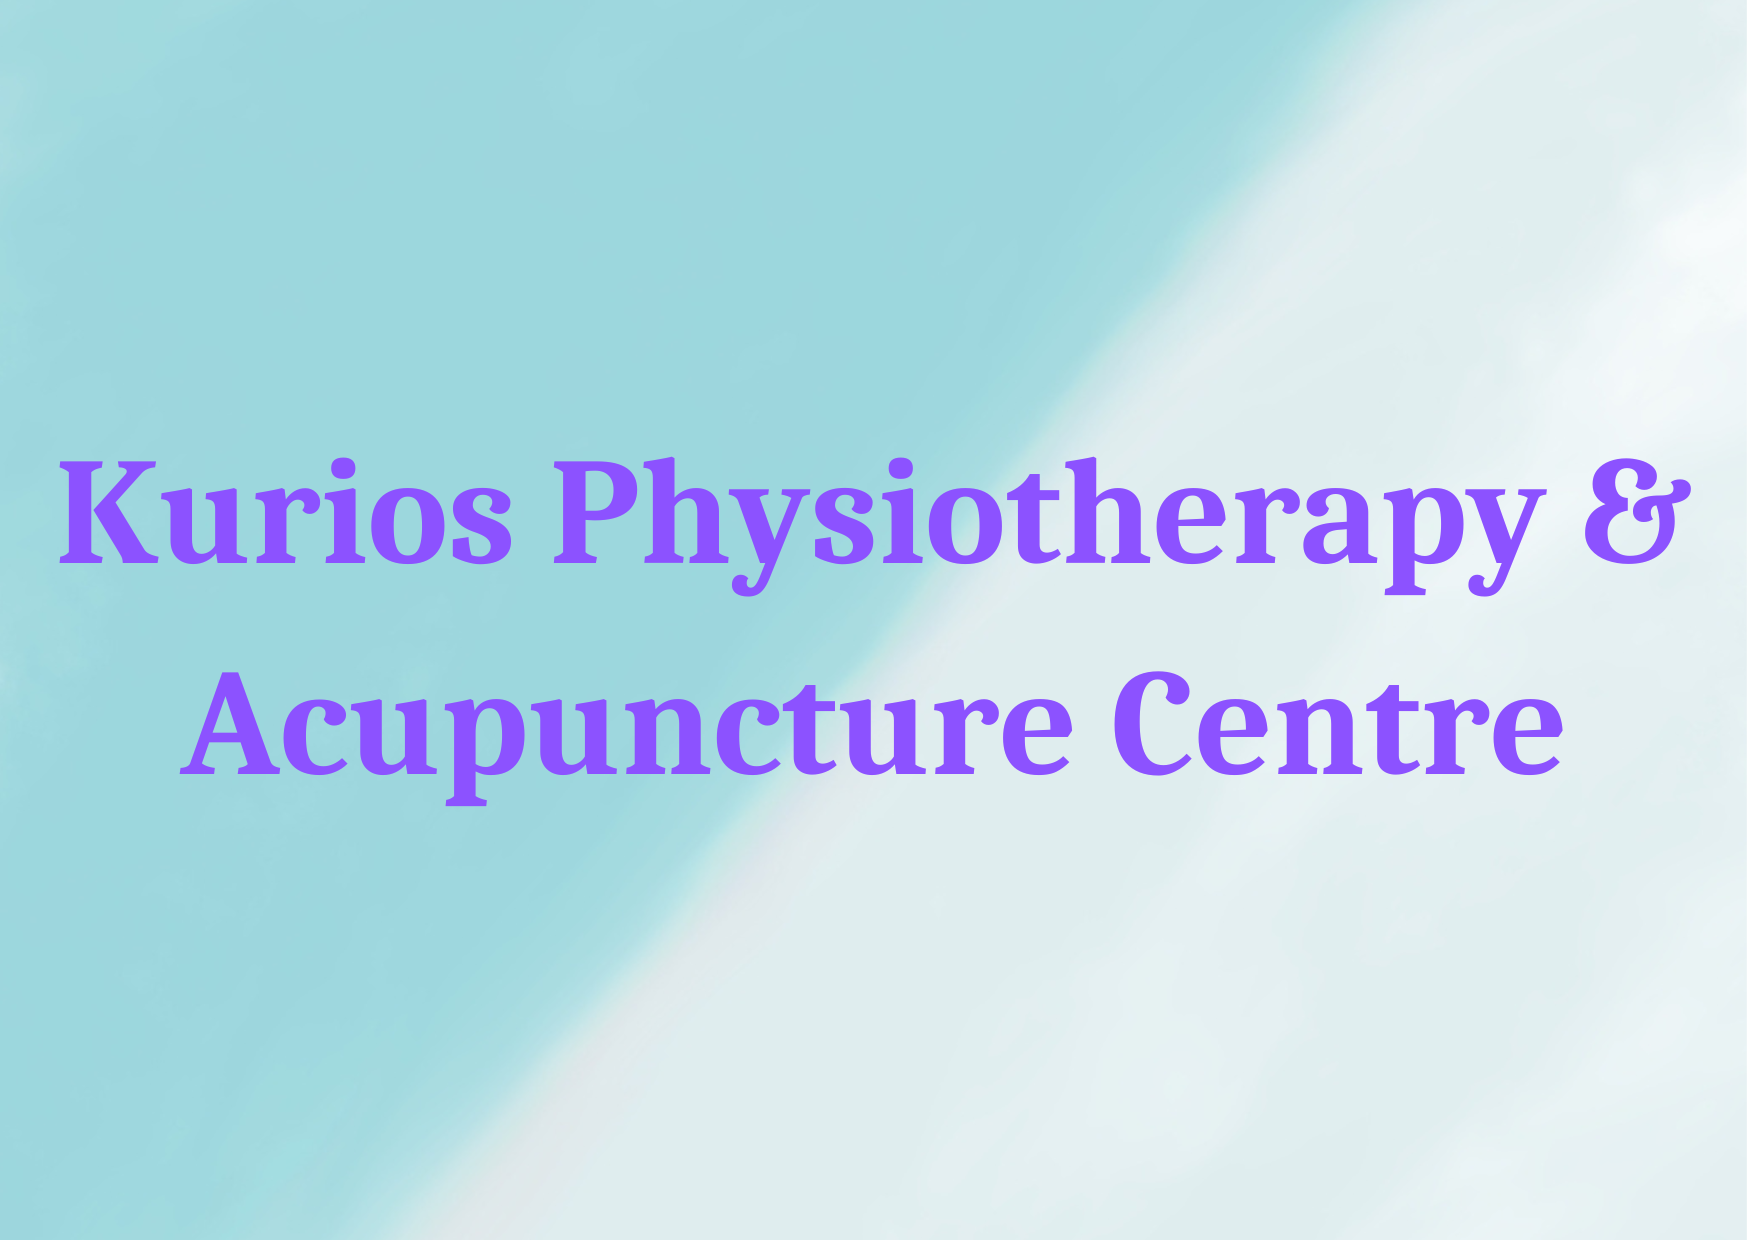 Kurios Physiotherapy & Acupuncture Centre 